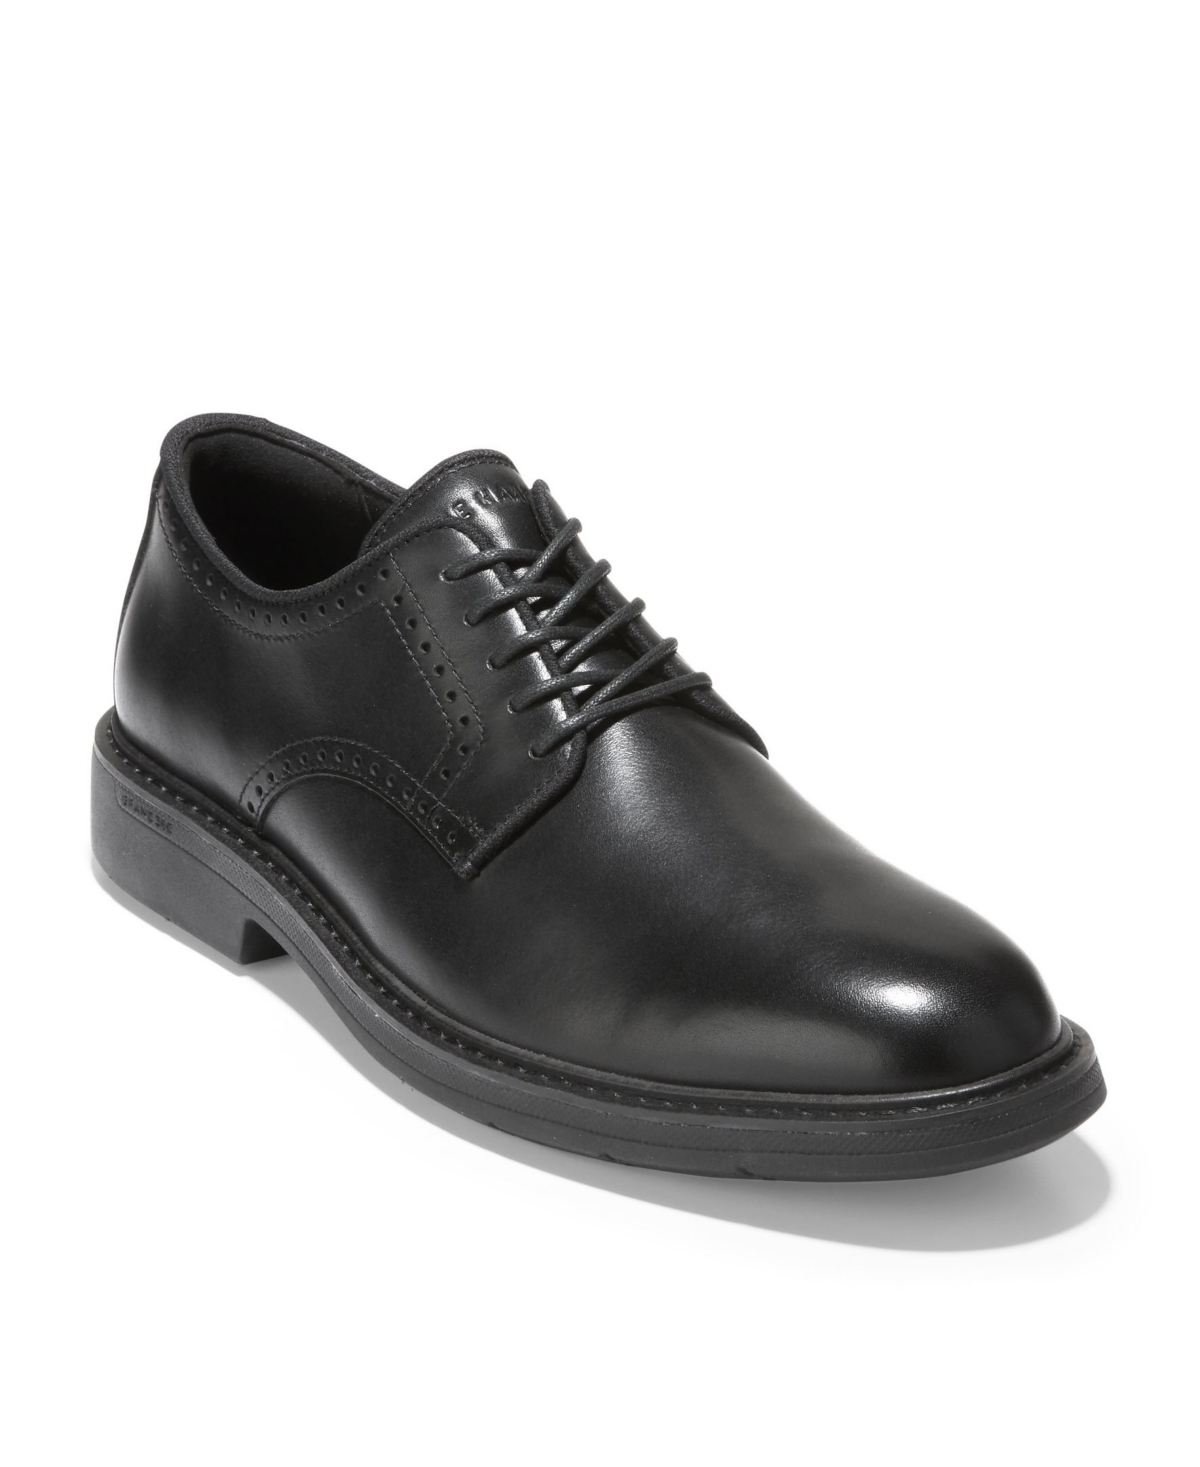 Cole Haan Men's The Go-to Oxford Shoe In Black,black